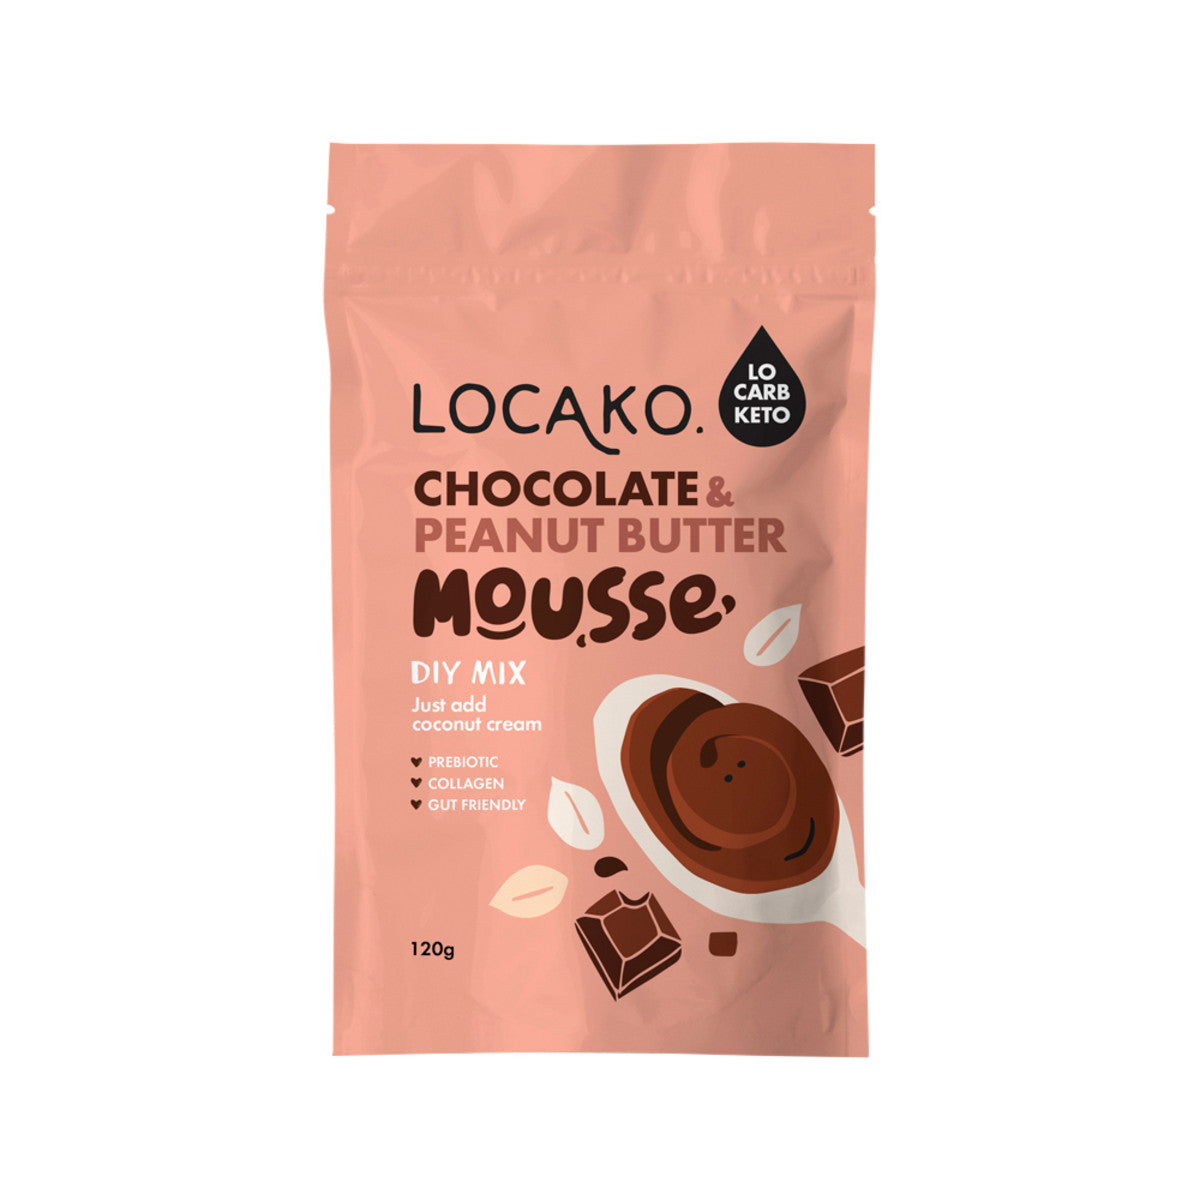 Locako Mousse Chocolate and Peanut Butter (DIY Mix) 120g